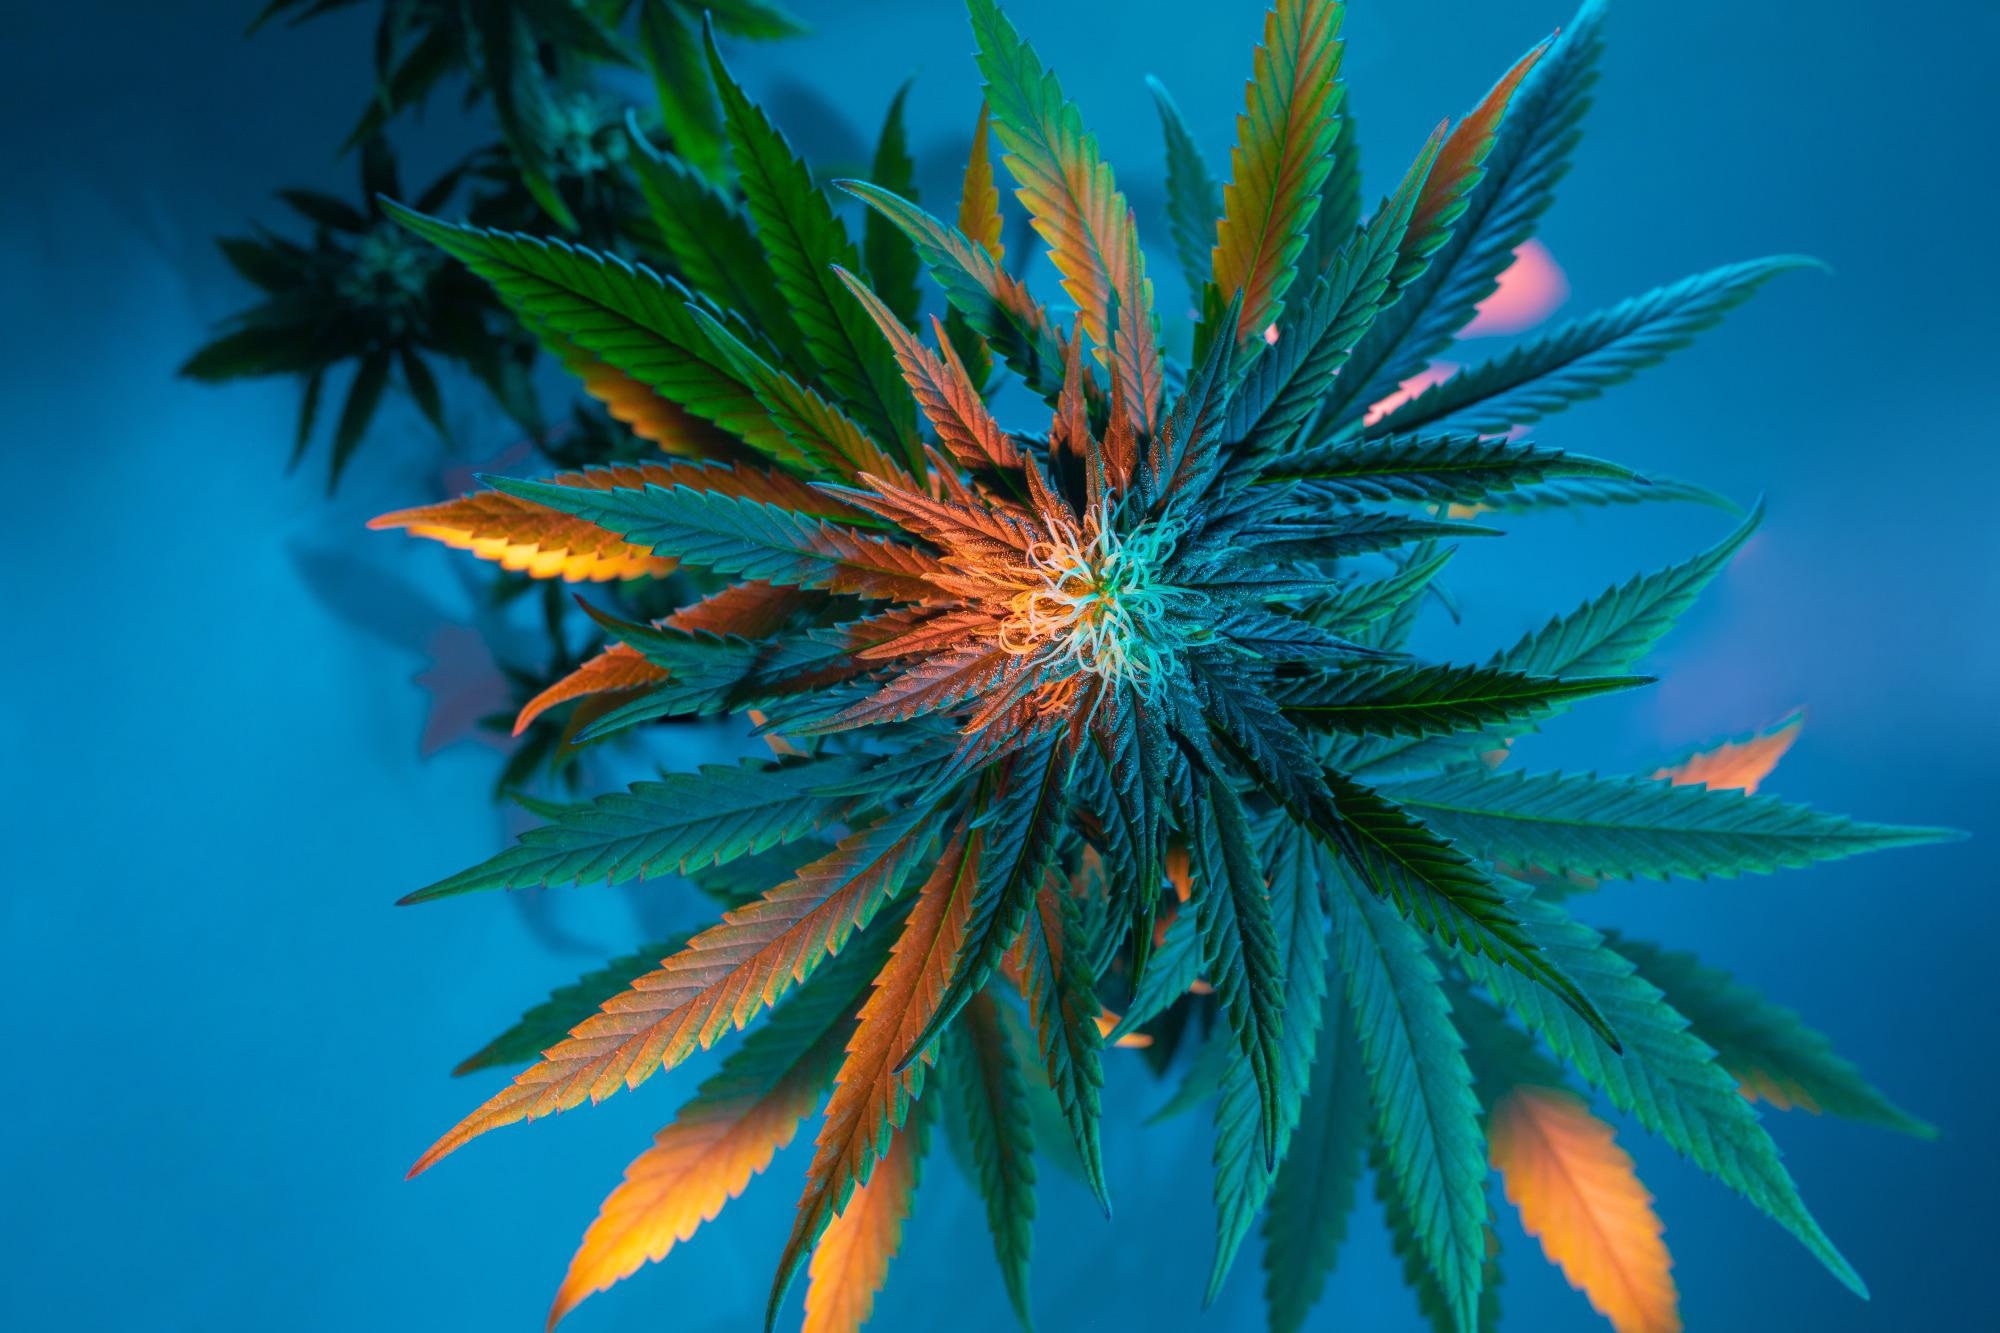 Methodological Reviews:  Cannabis in palliative care: a systematic review of current evidence. Image Credit: Tsareva.pro / Shutterstock